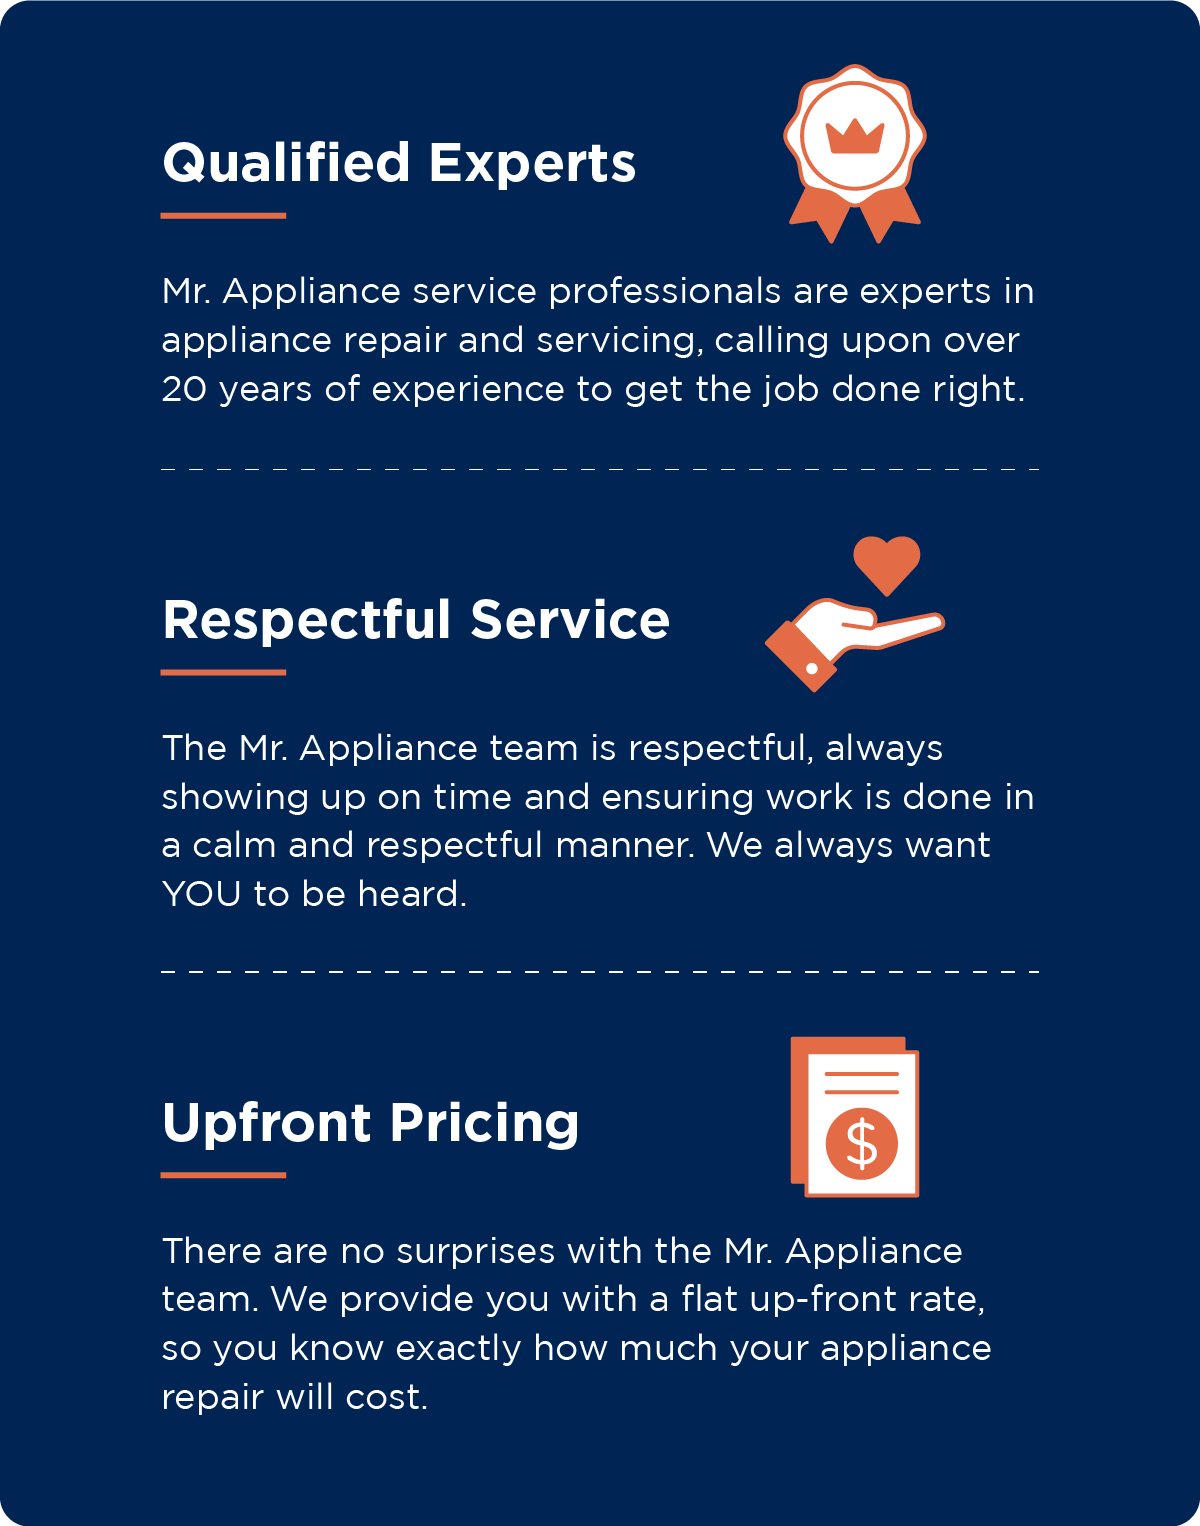 The reasons to hire Mr. Appliance: qualified experts, respectful service, upfront pricing